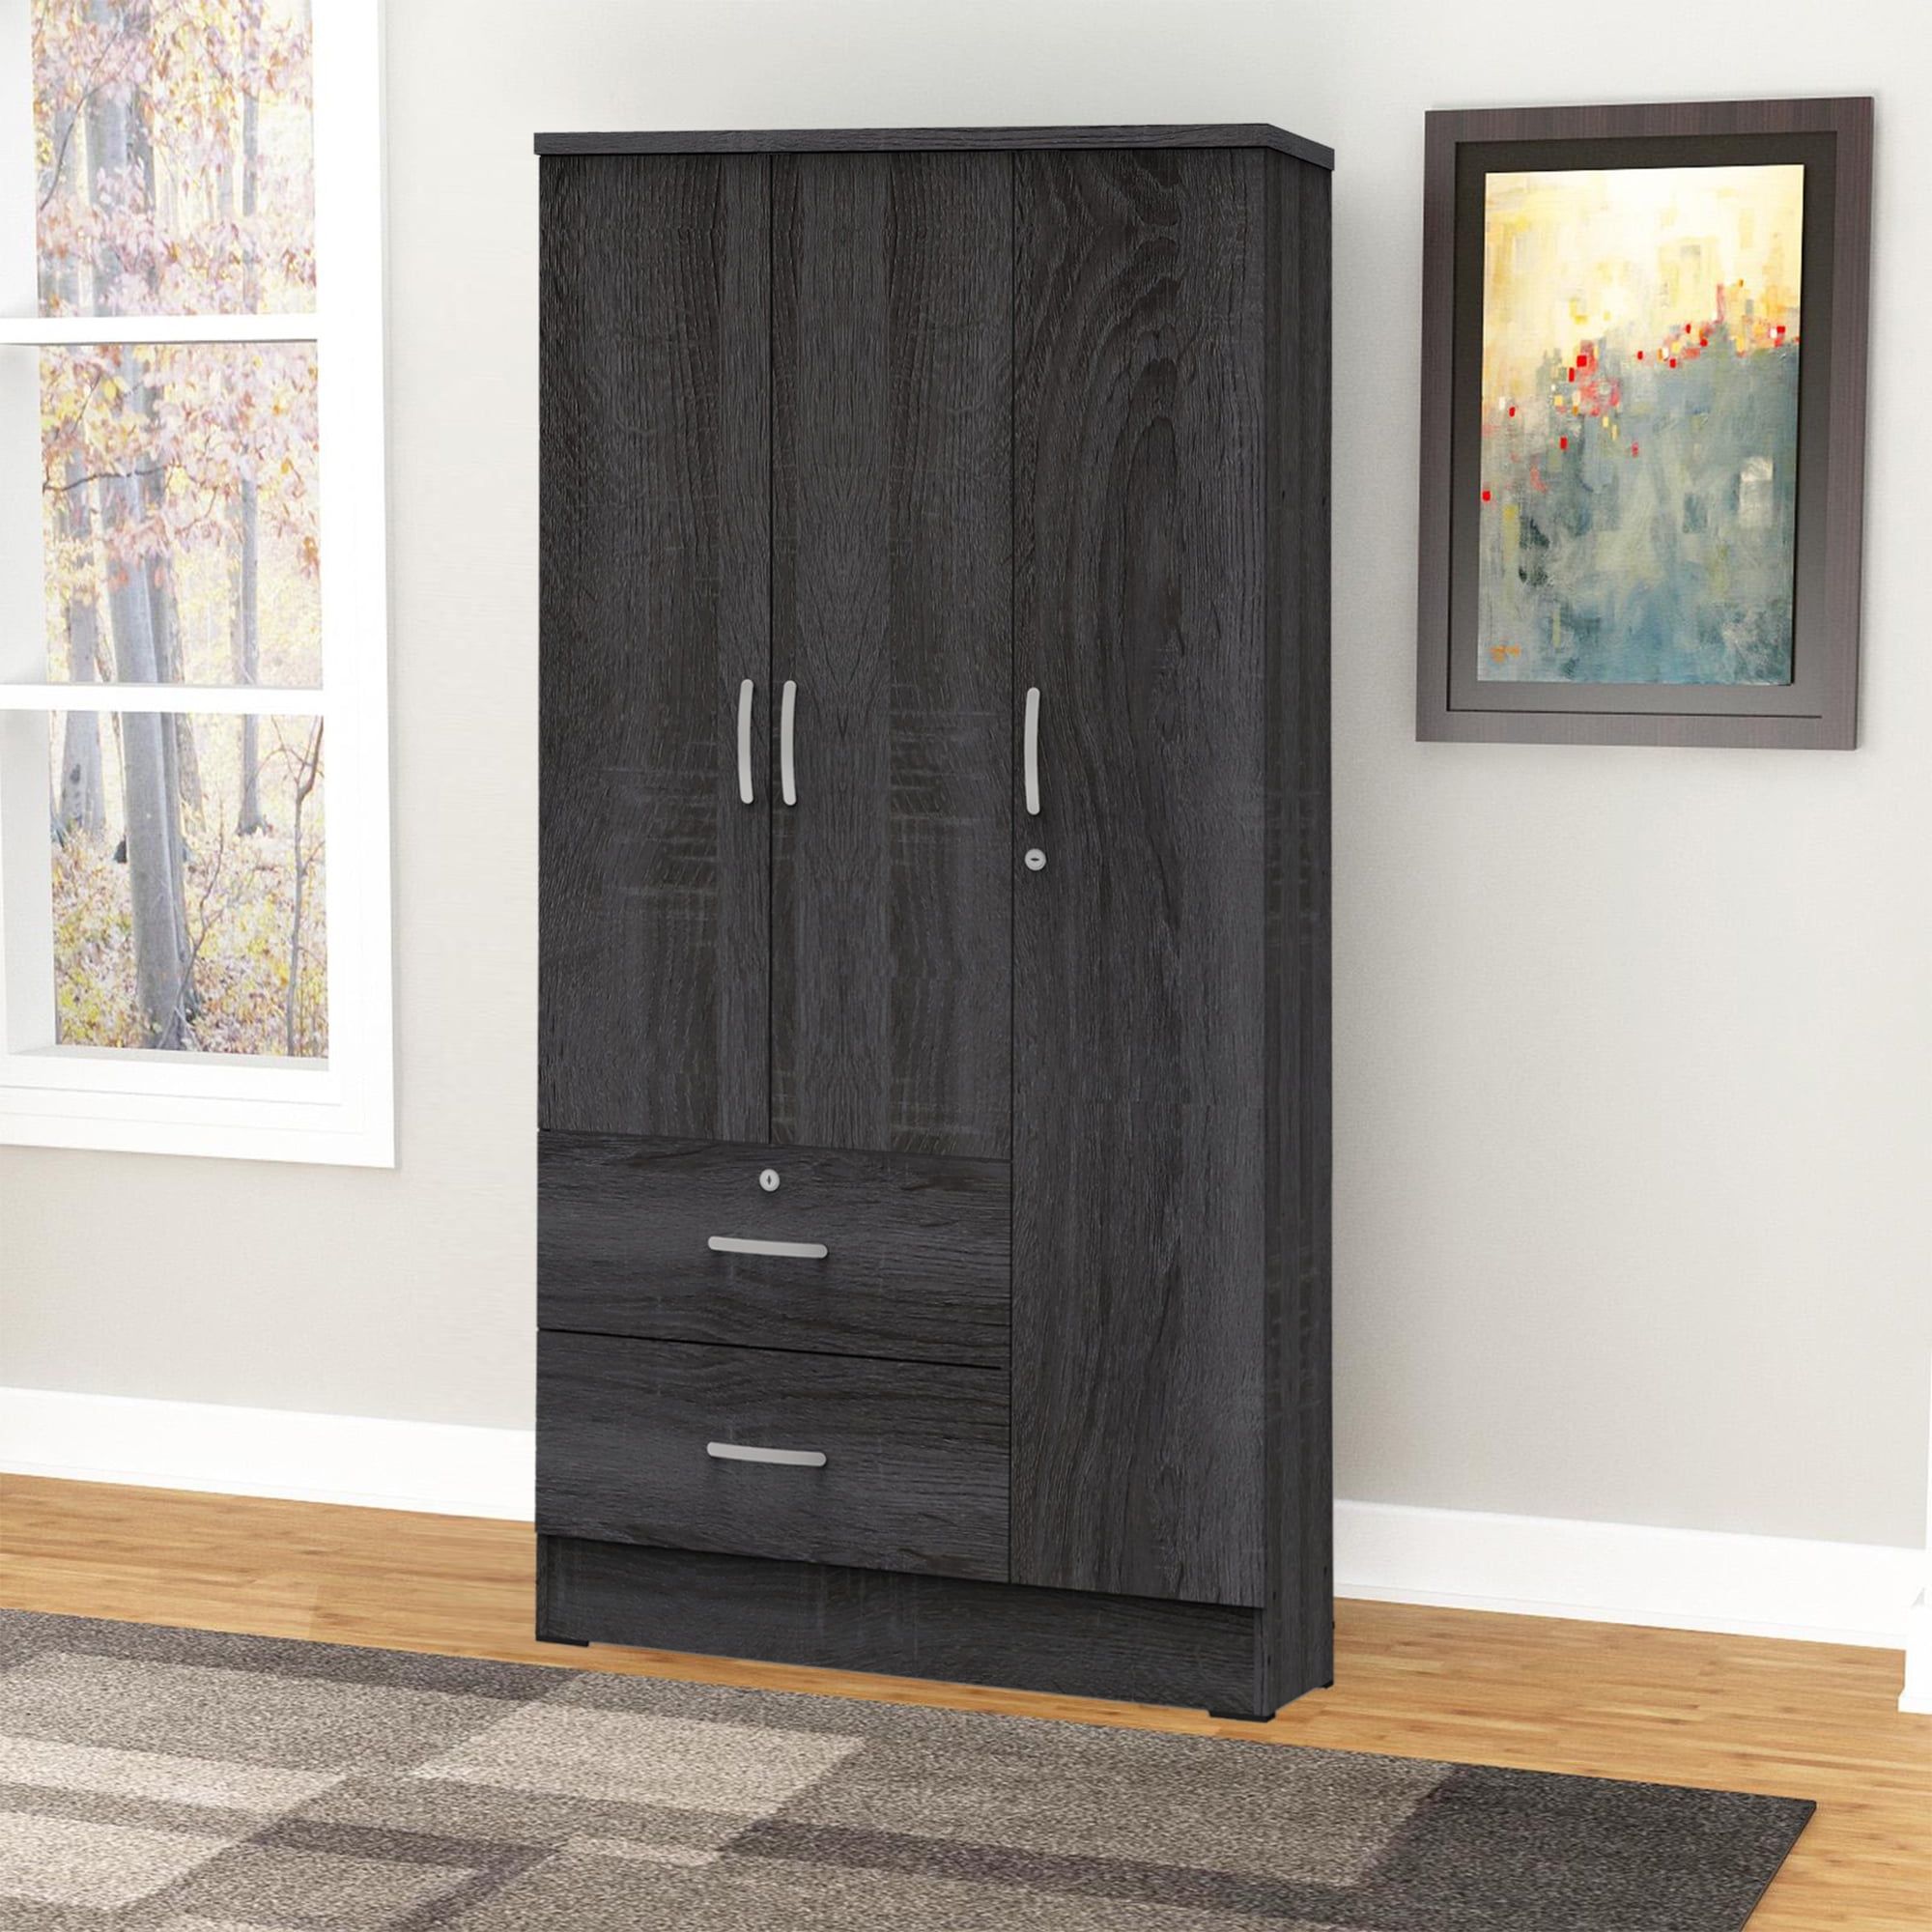 Better Home Products Symphony Wardrobe Armoire Closet With Two Drawers  Mahogany – Walmart With Cameo 2 Door Wardrobes (View 15 of 15)